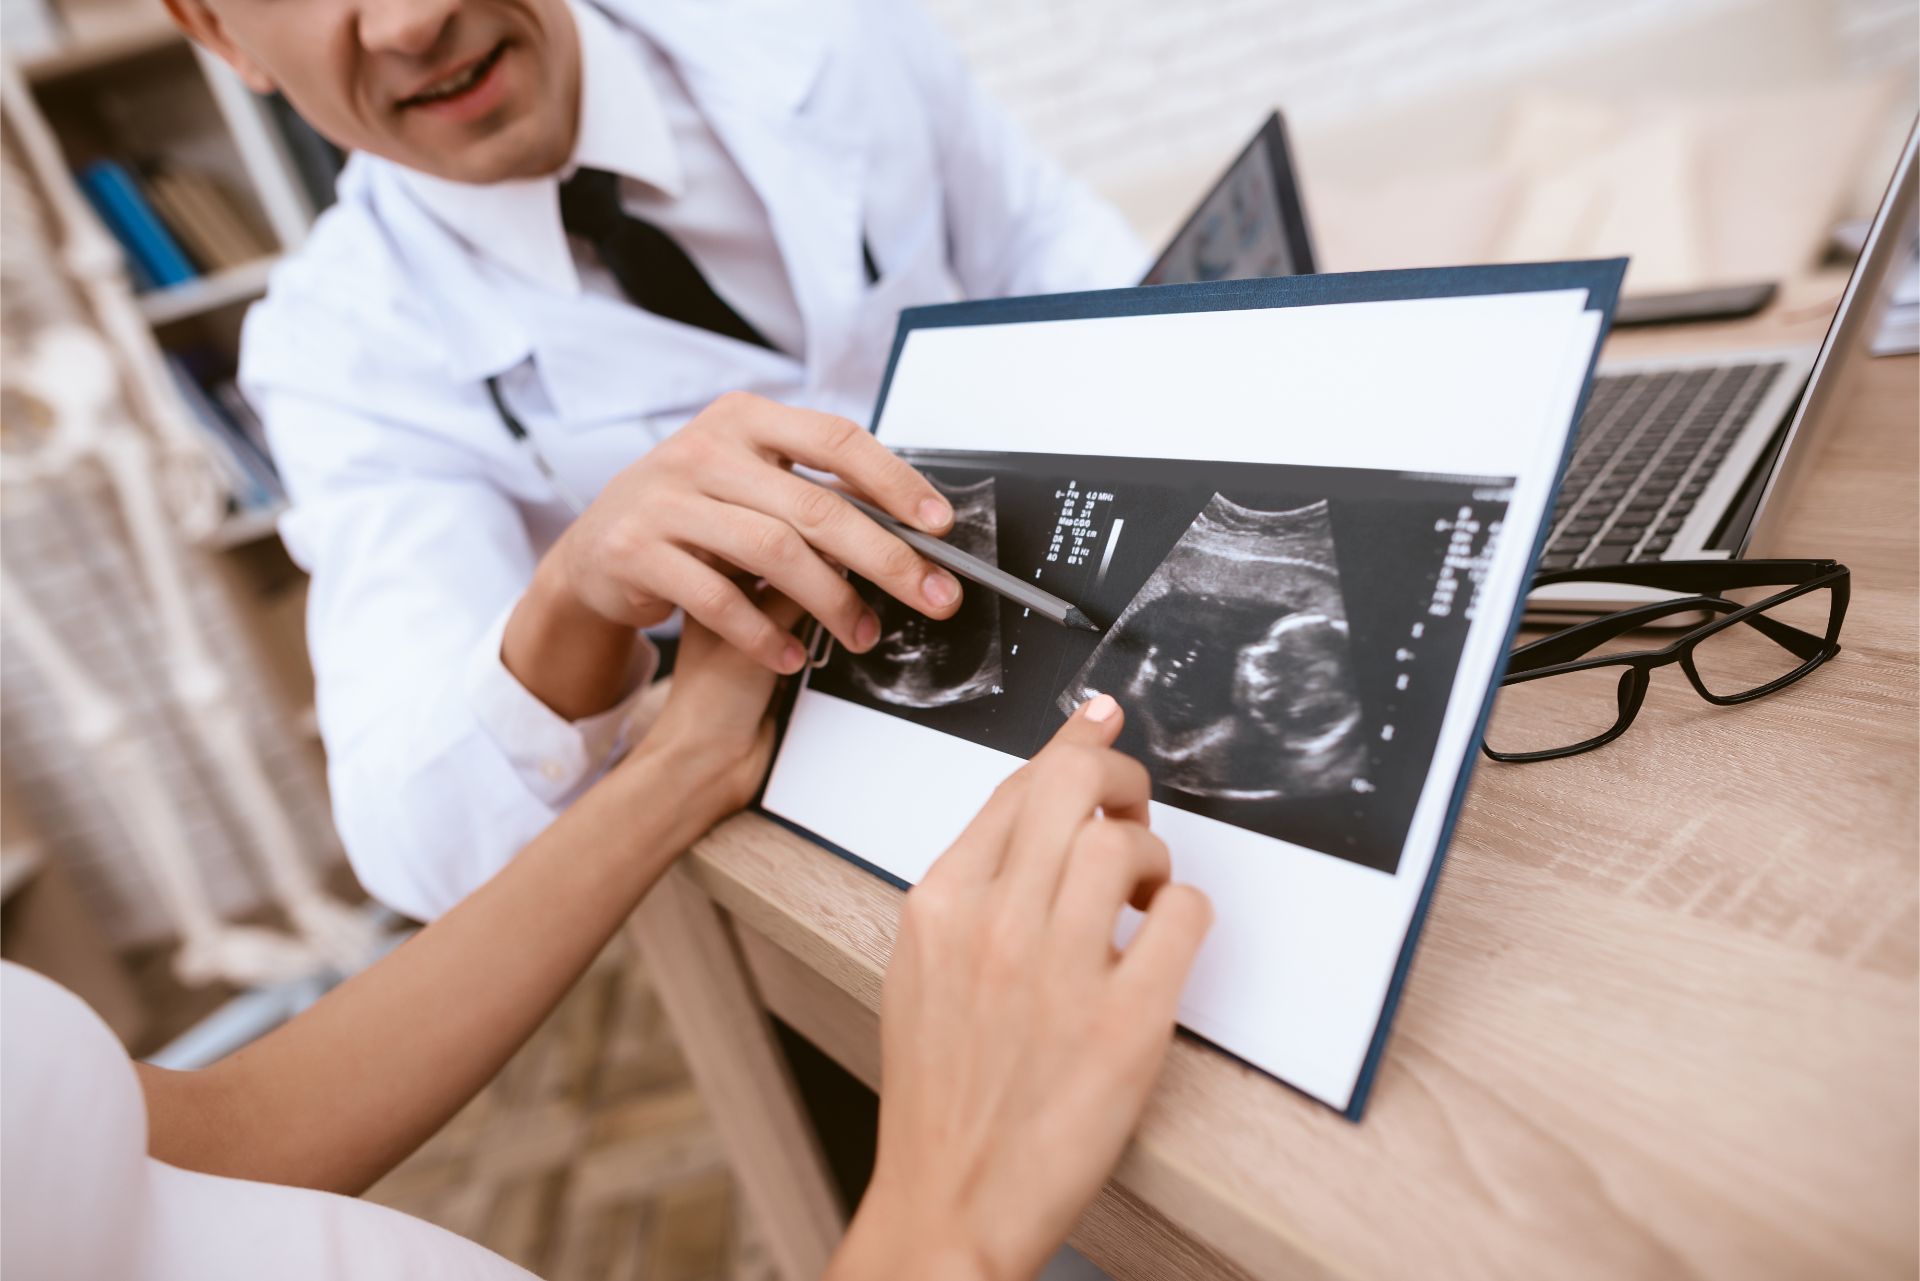 Doctor and patient looking at sonogram